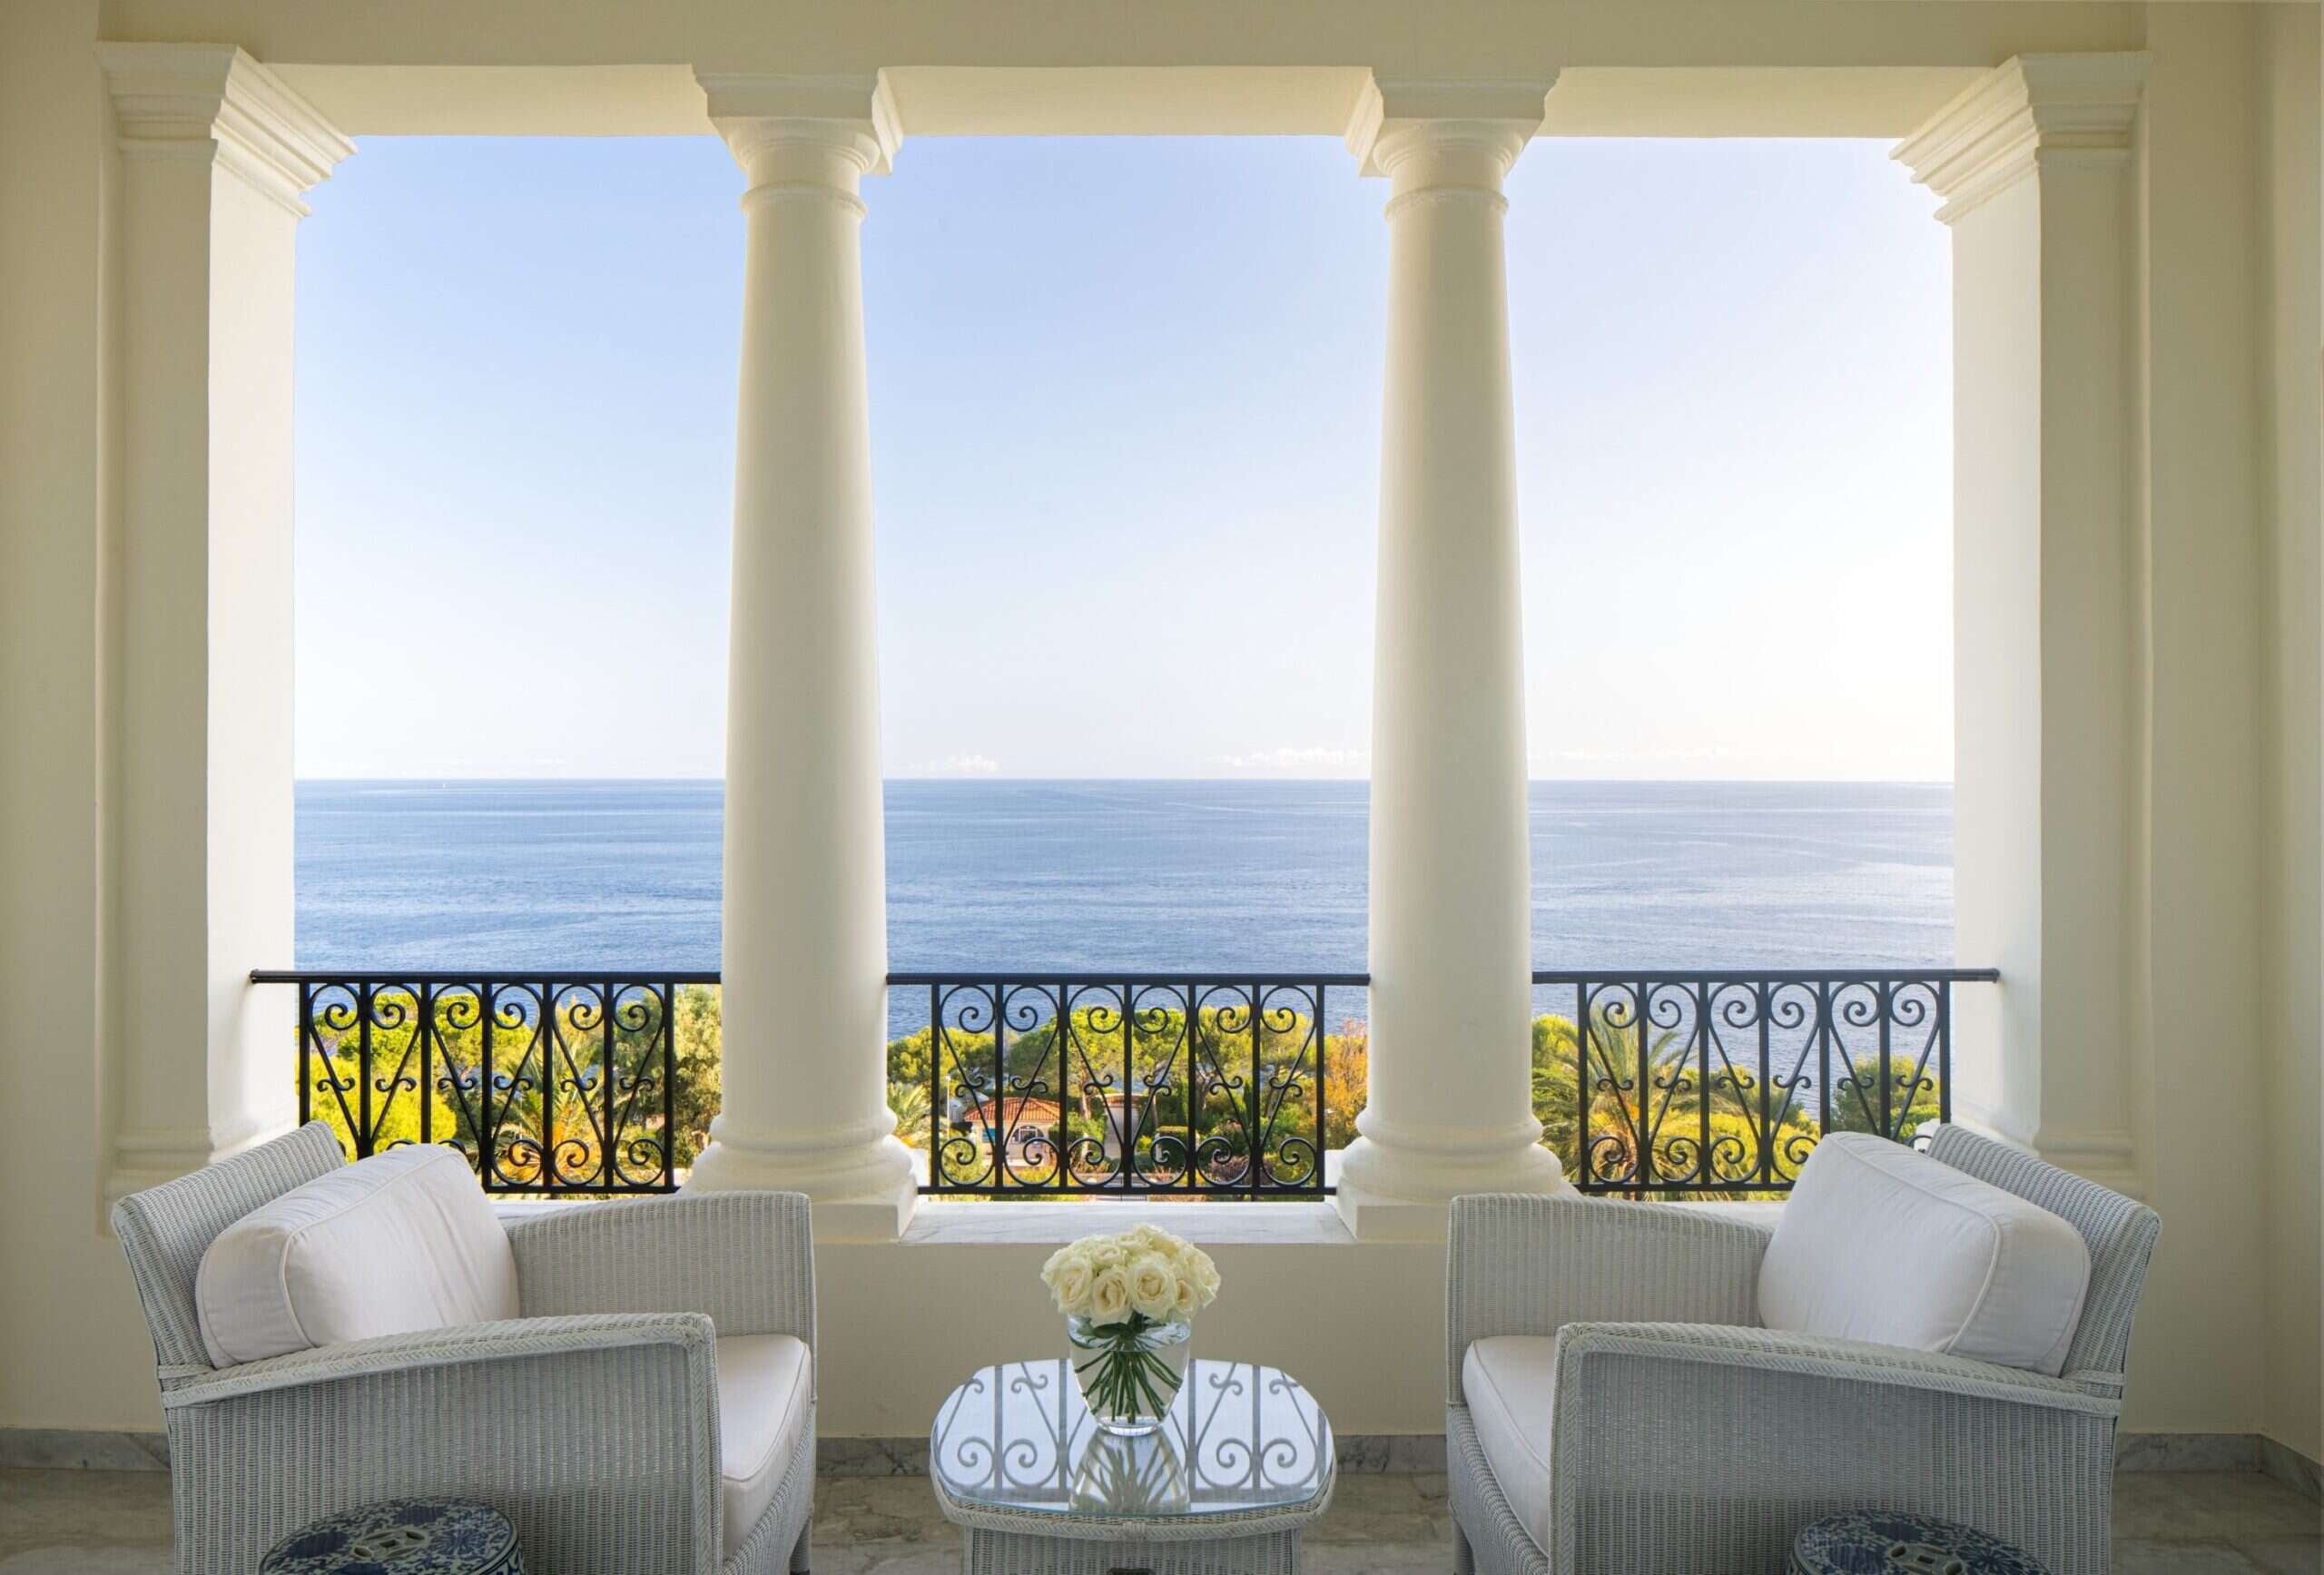 Terrace at the Grand-Hotel du Cap Ferrat overlooking the South of France terrain